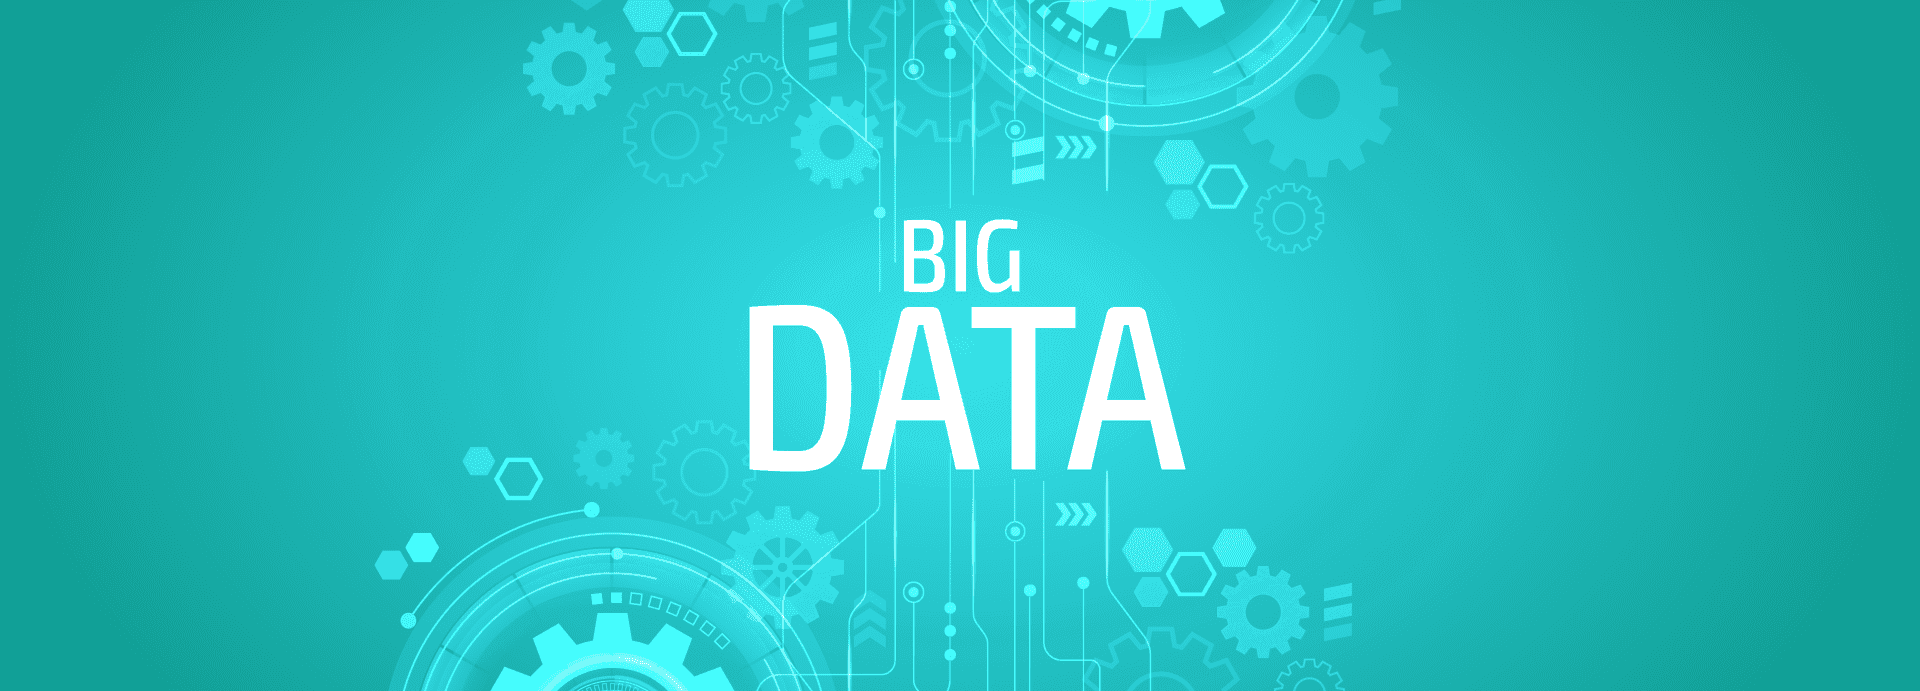 Impact of Big Data on Business, Economy, Health Care, and Society